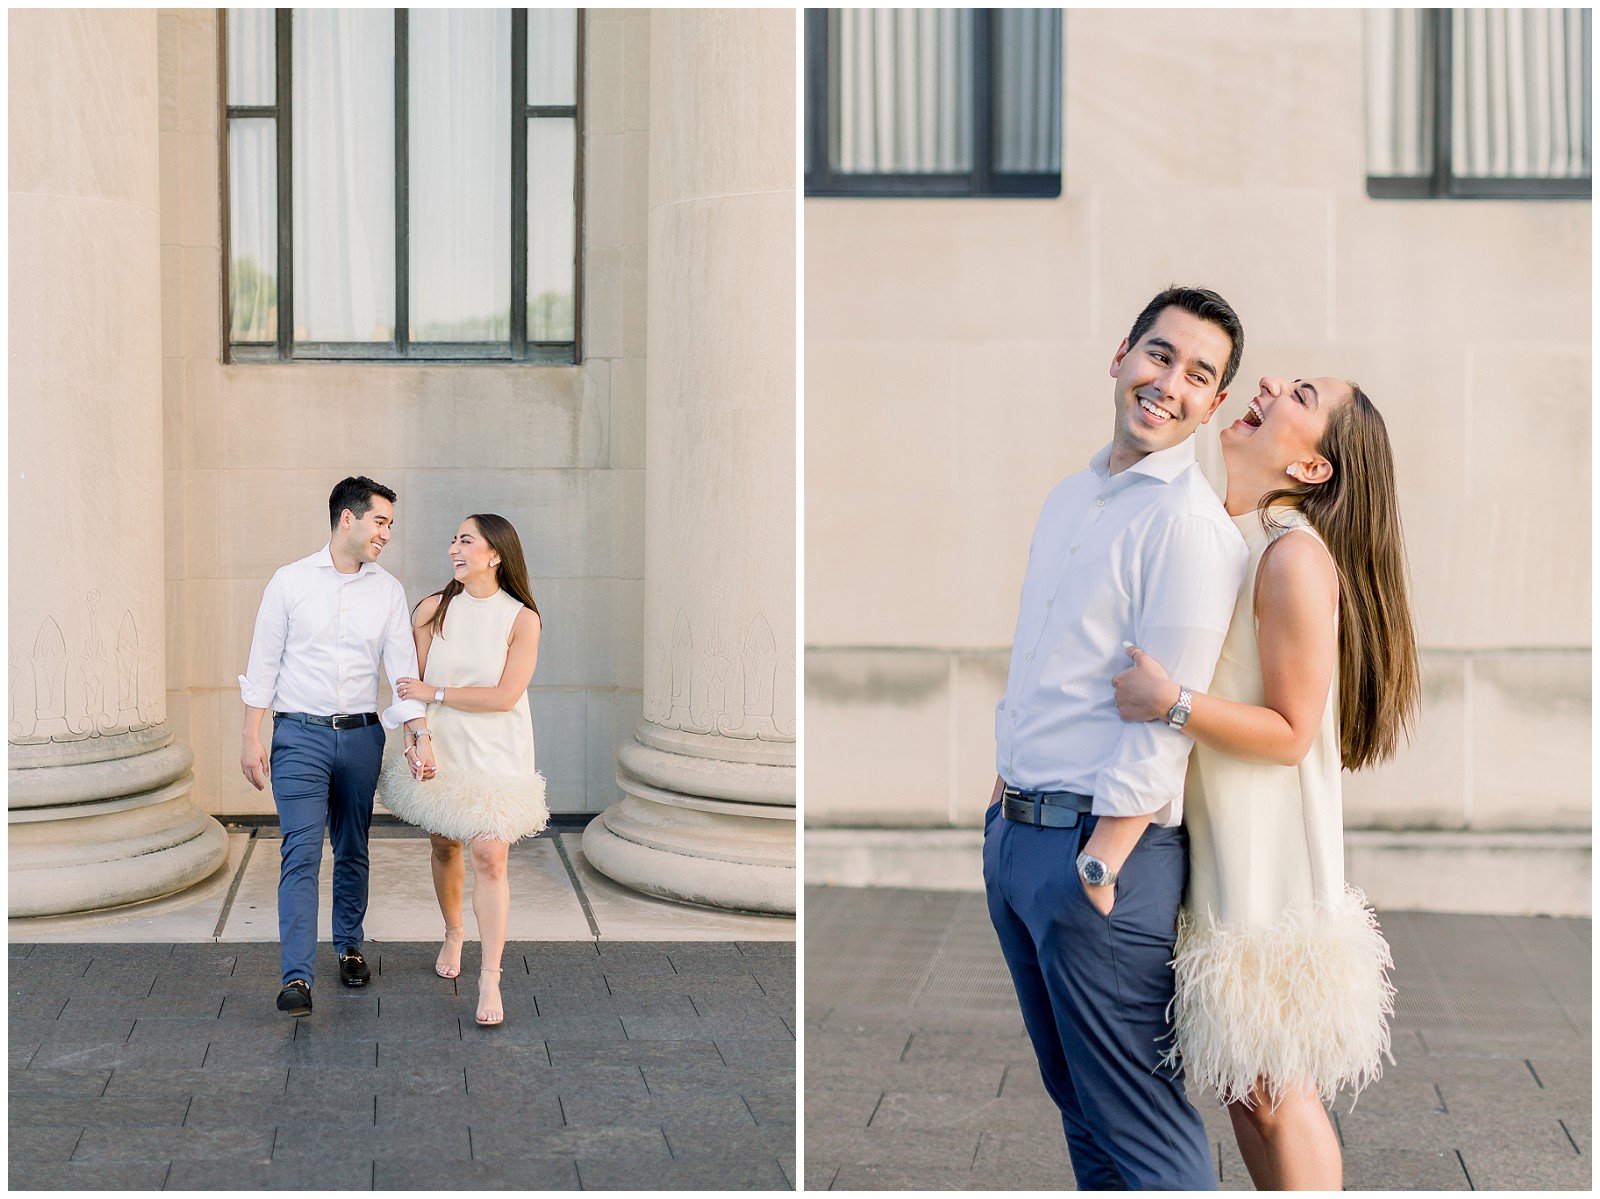 Summer-Engagement-Photos-at-The-Nelson-Atkins-K+S-0522-Elizabeth-Ladean-Photography-photo-_6482.jpg